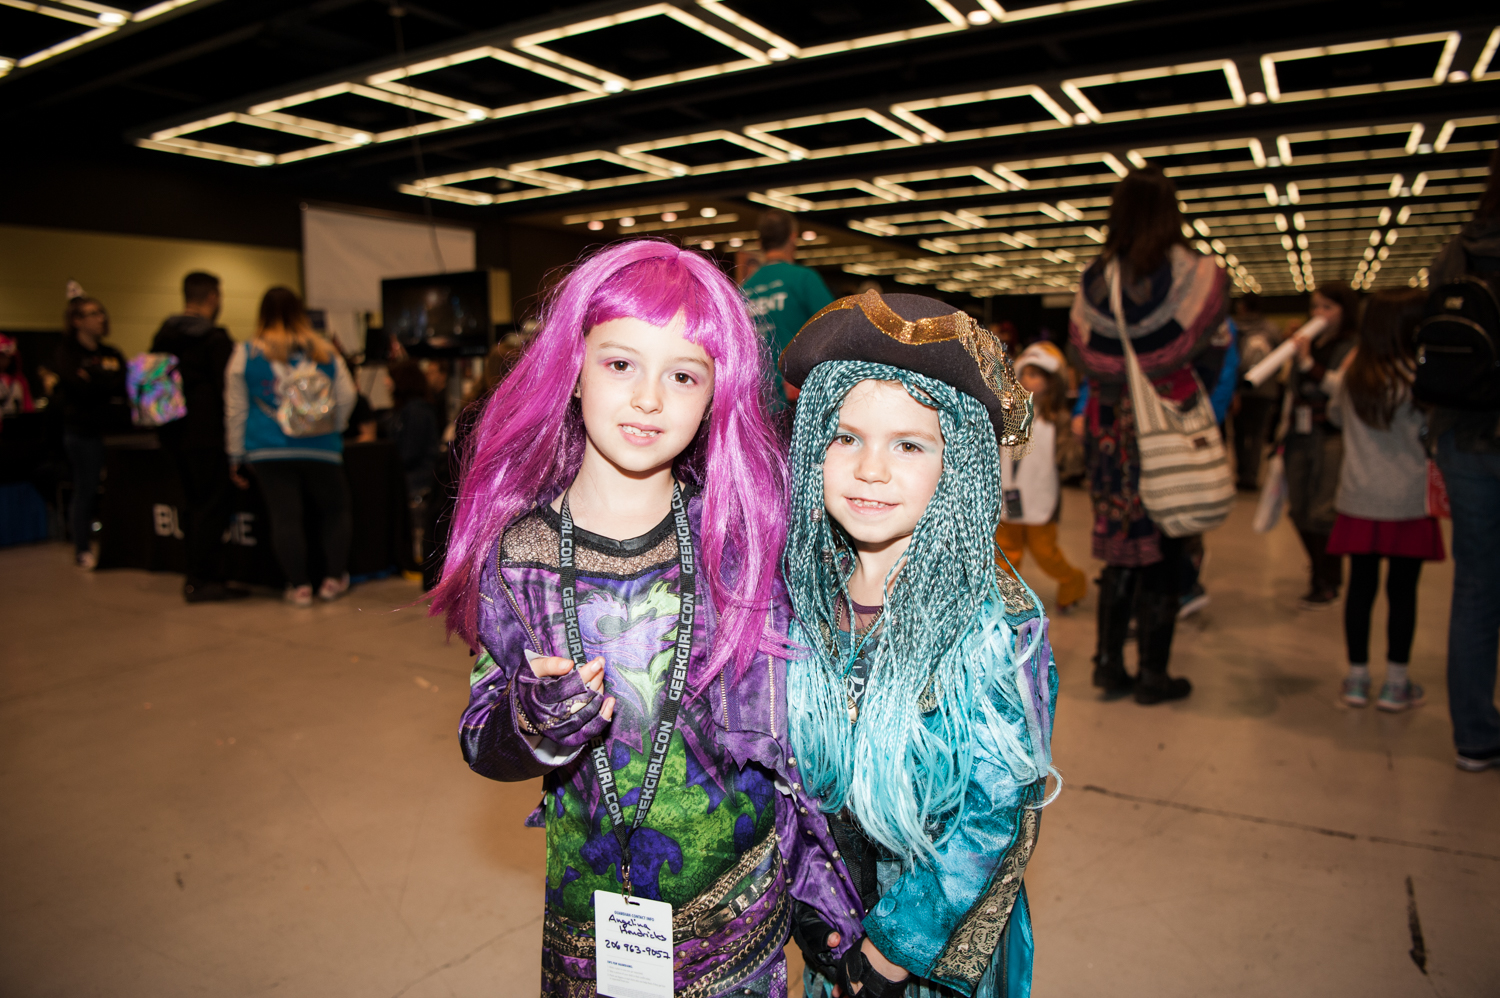 Photos Thousands of Geek Girls swarm downtown Seattle for annual